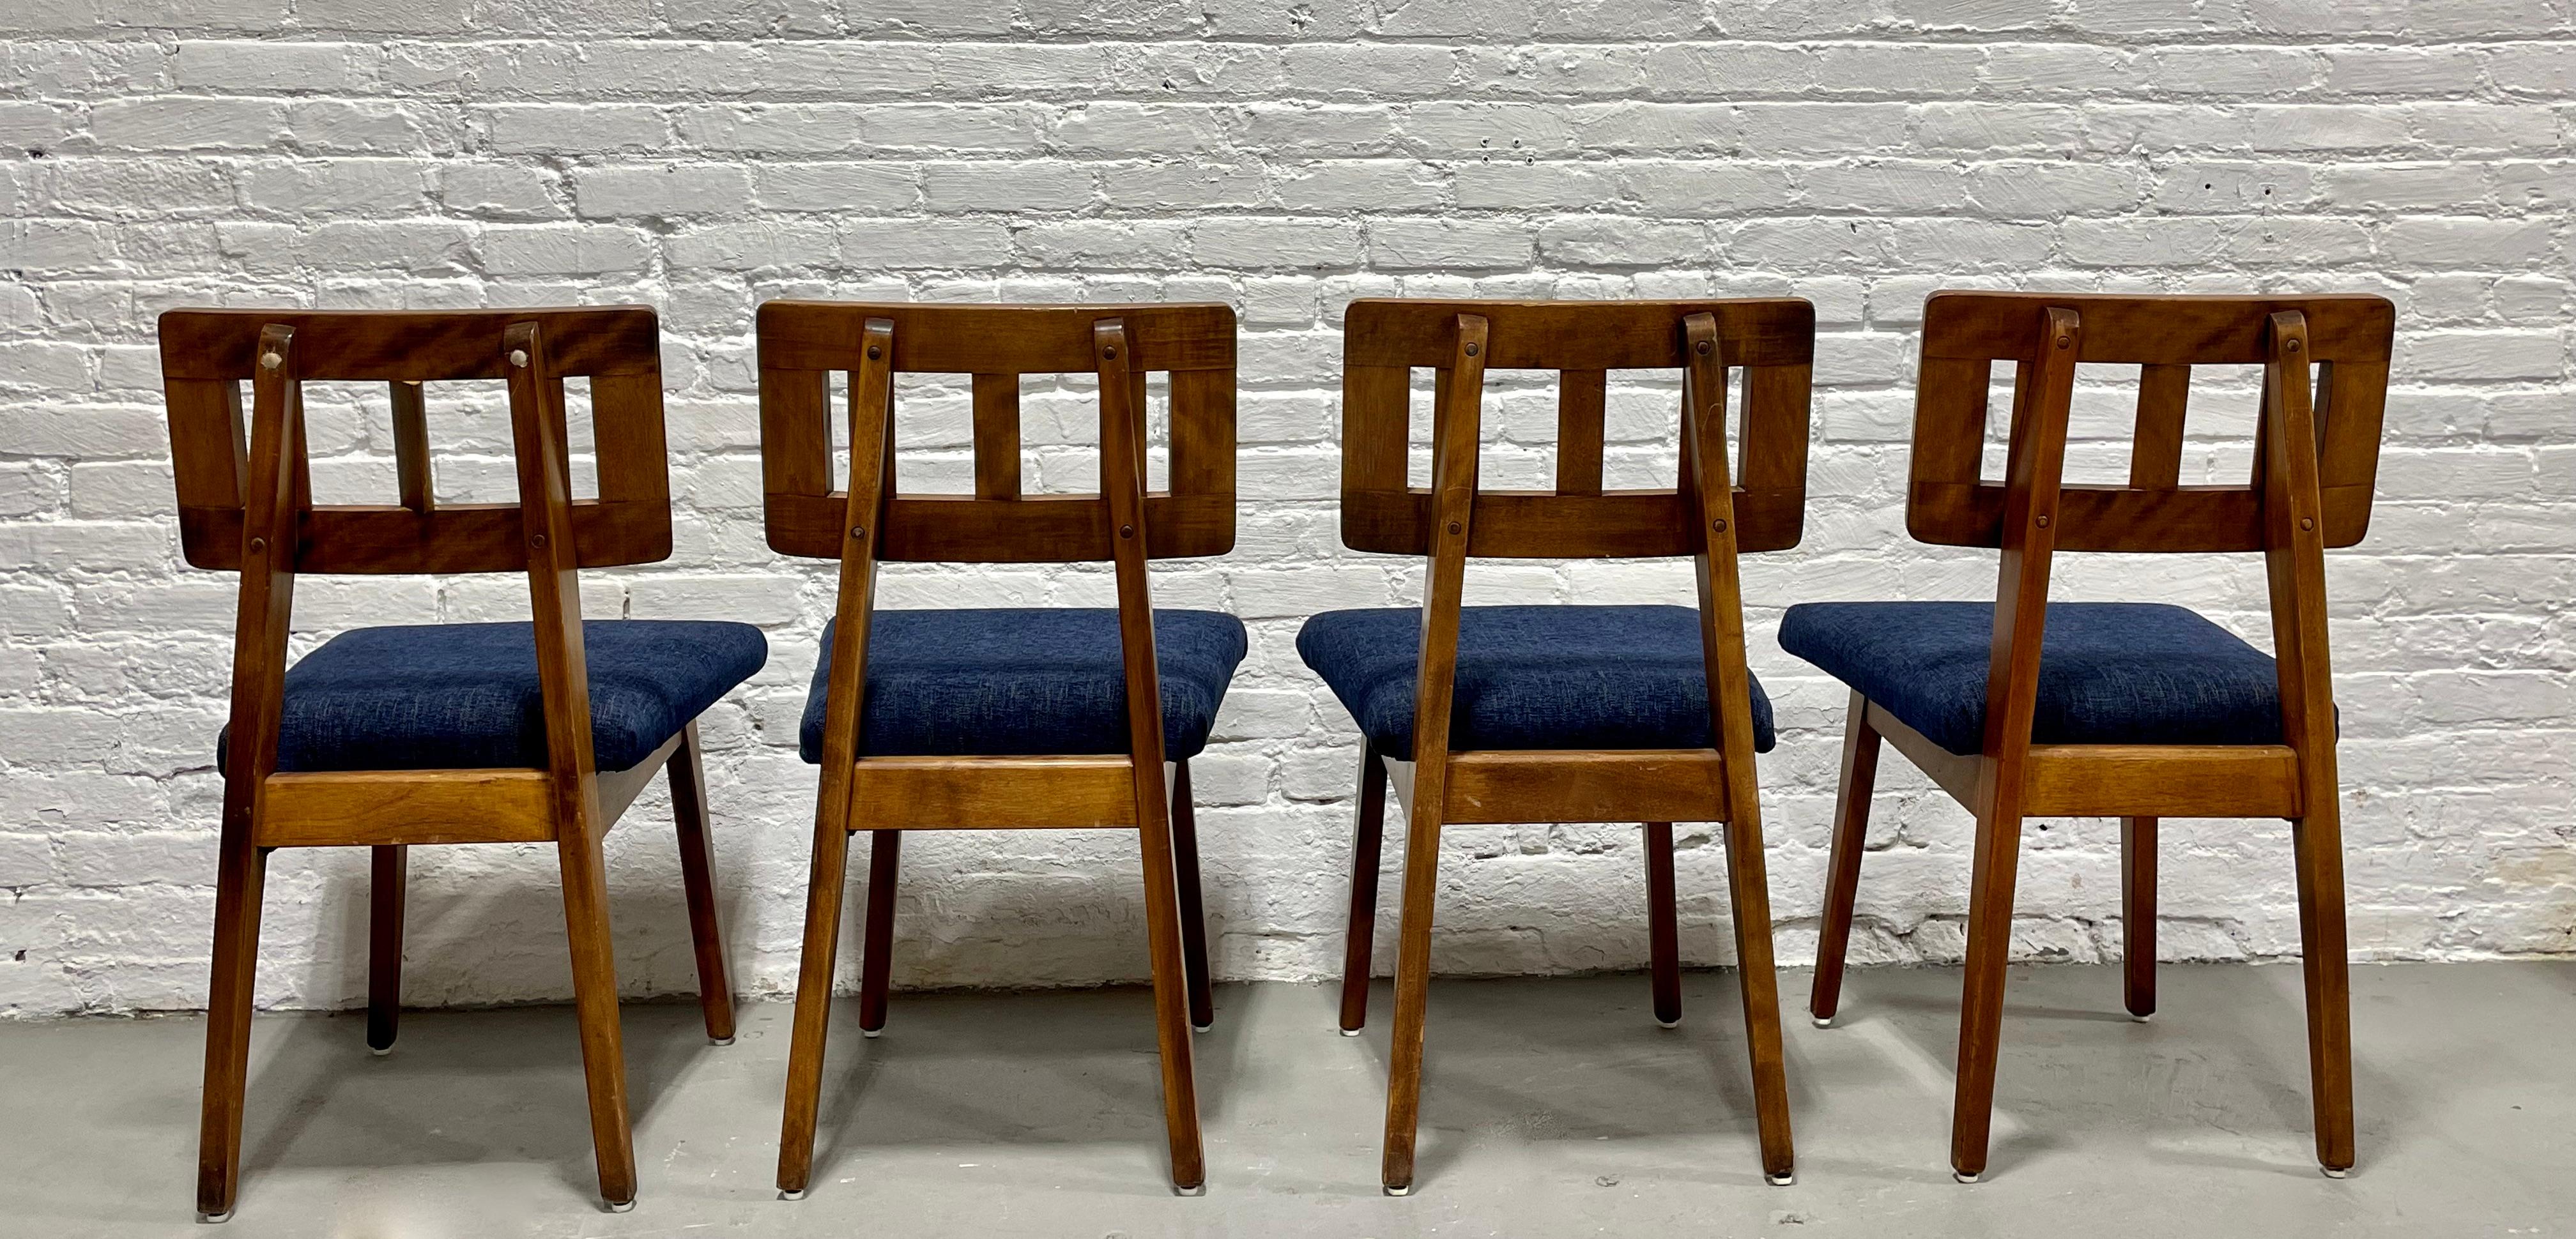 Mid-Century Modern Walnut Dining Chairs + New Denim Upholstery, Set/6 For Sale 4